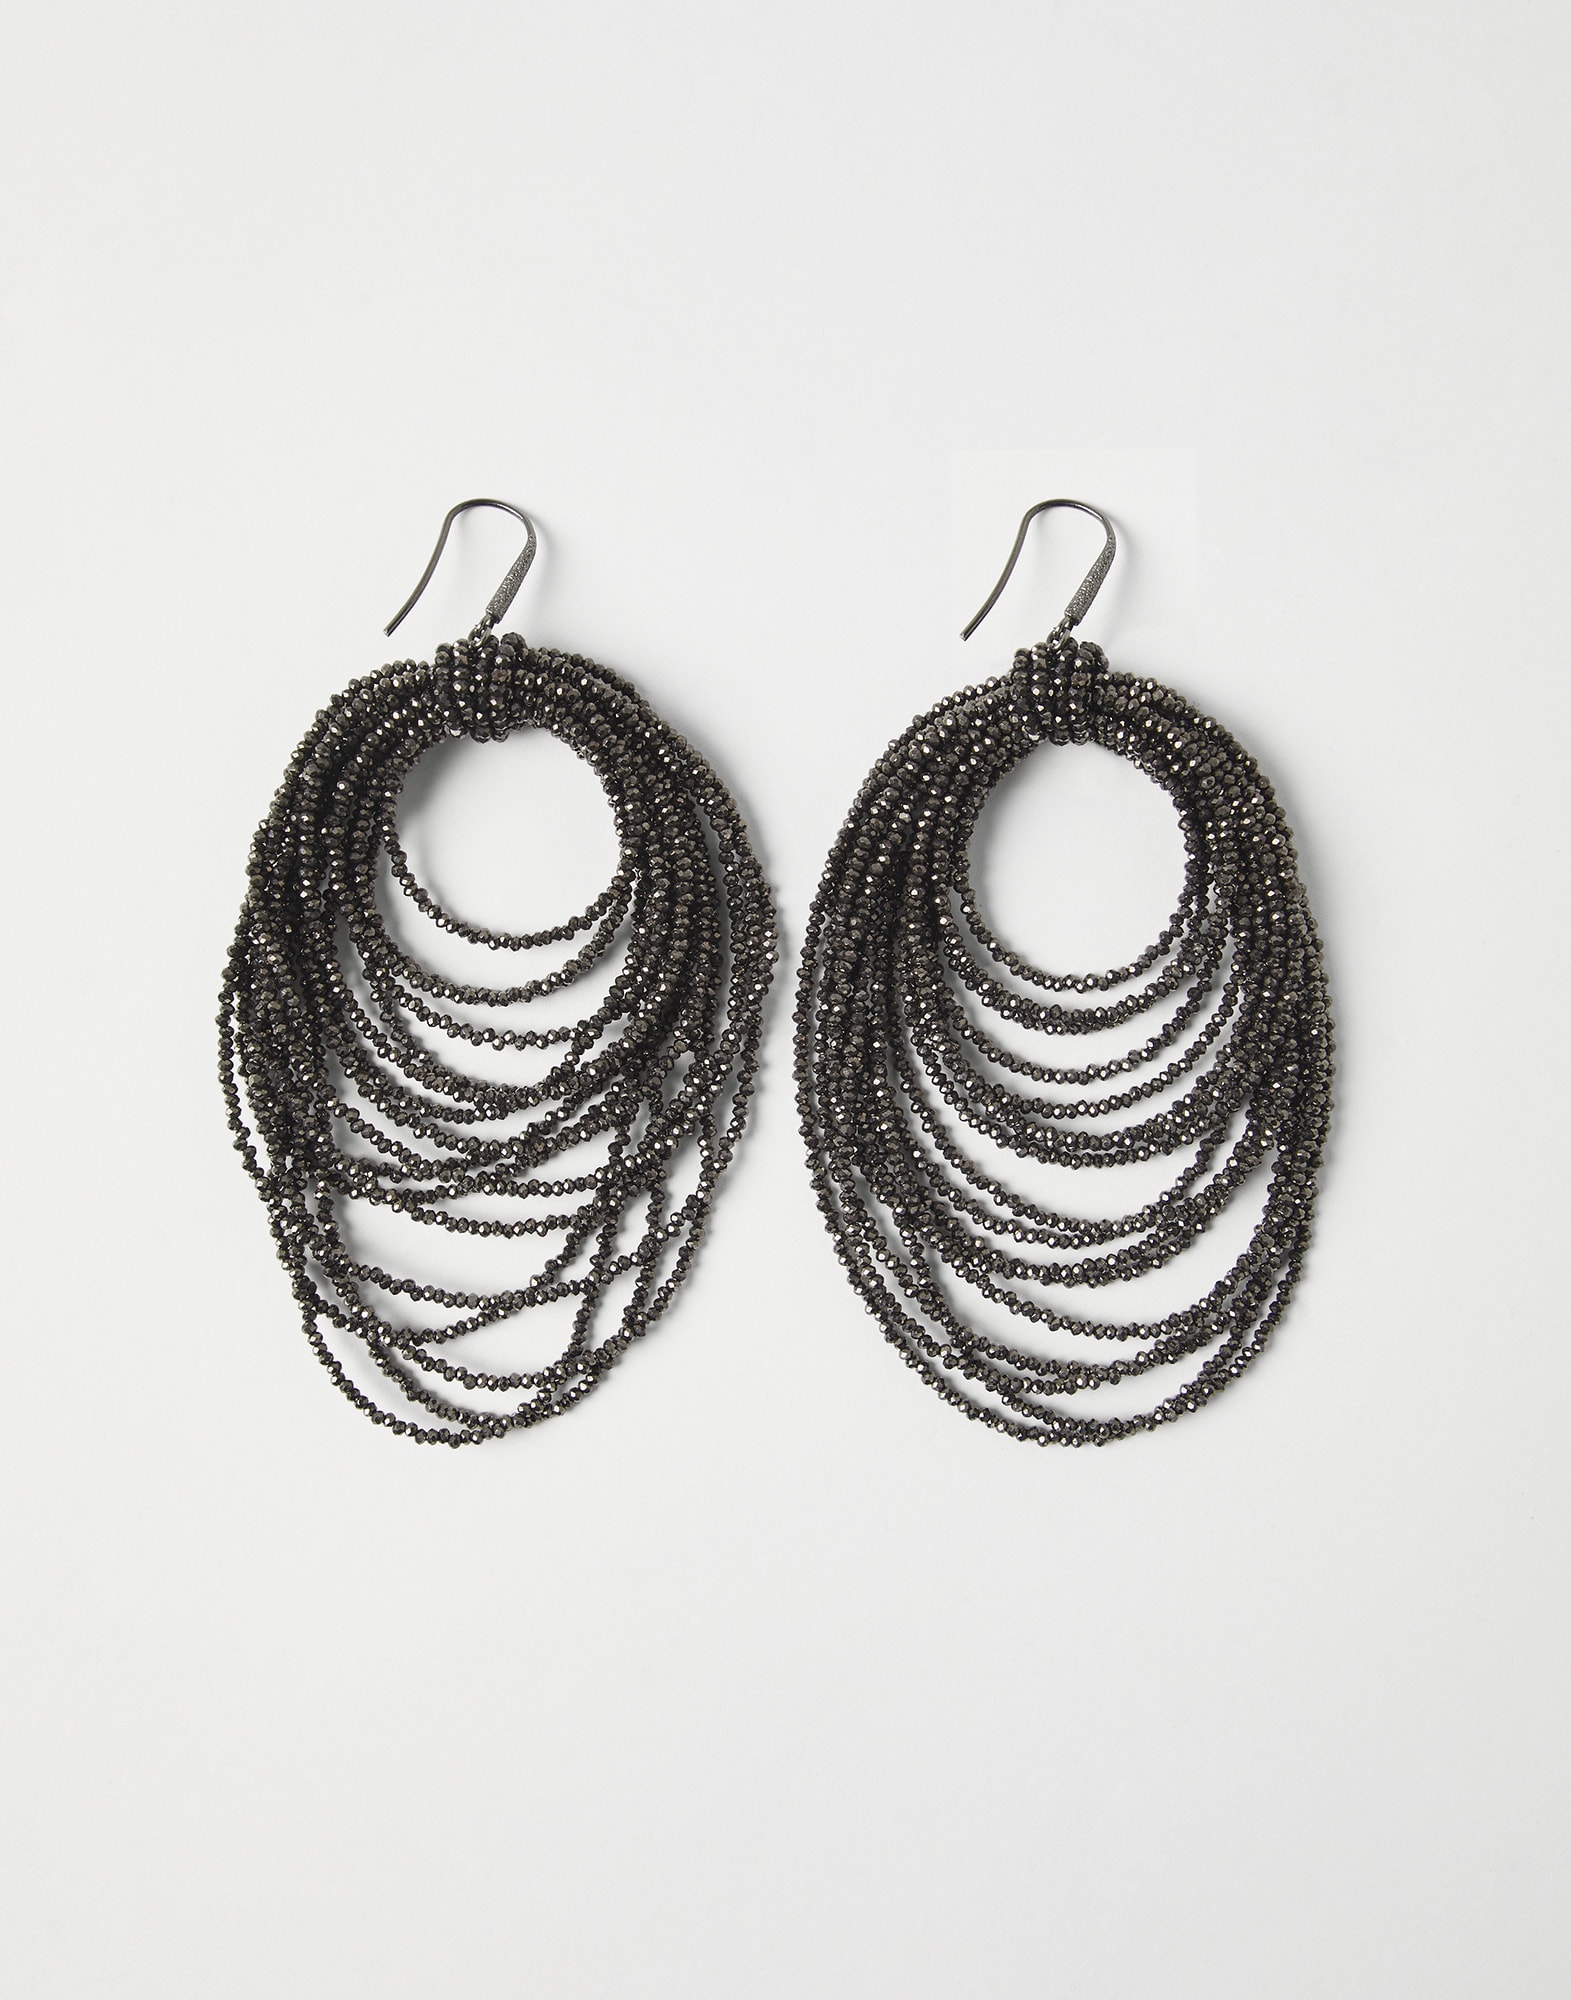 Earrings - Front view